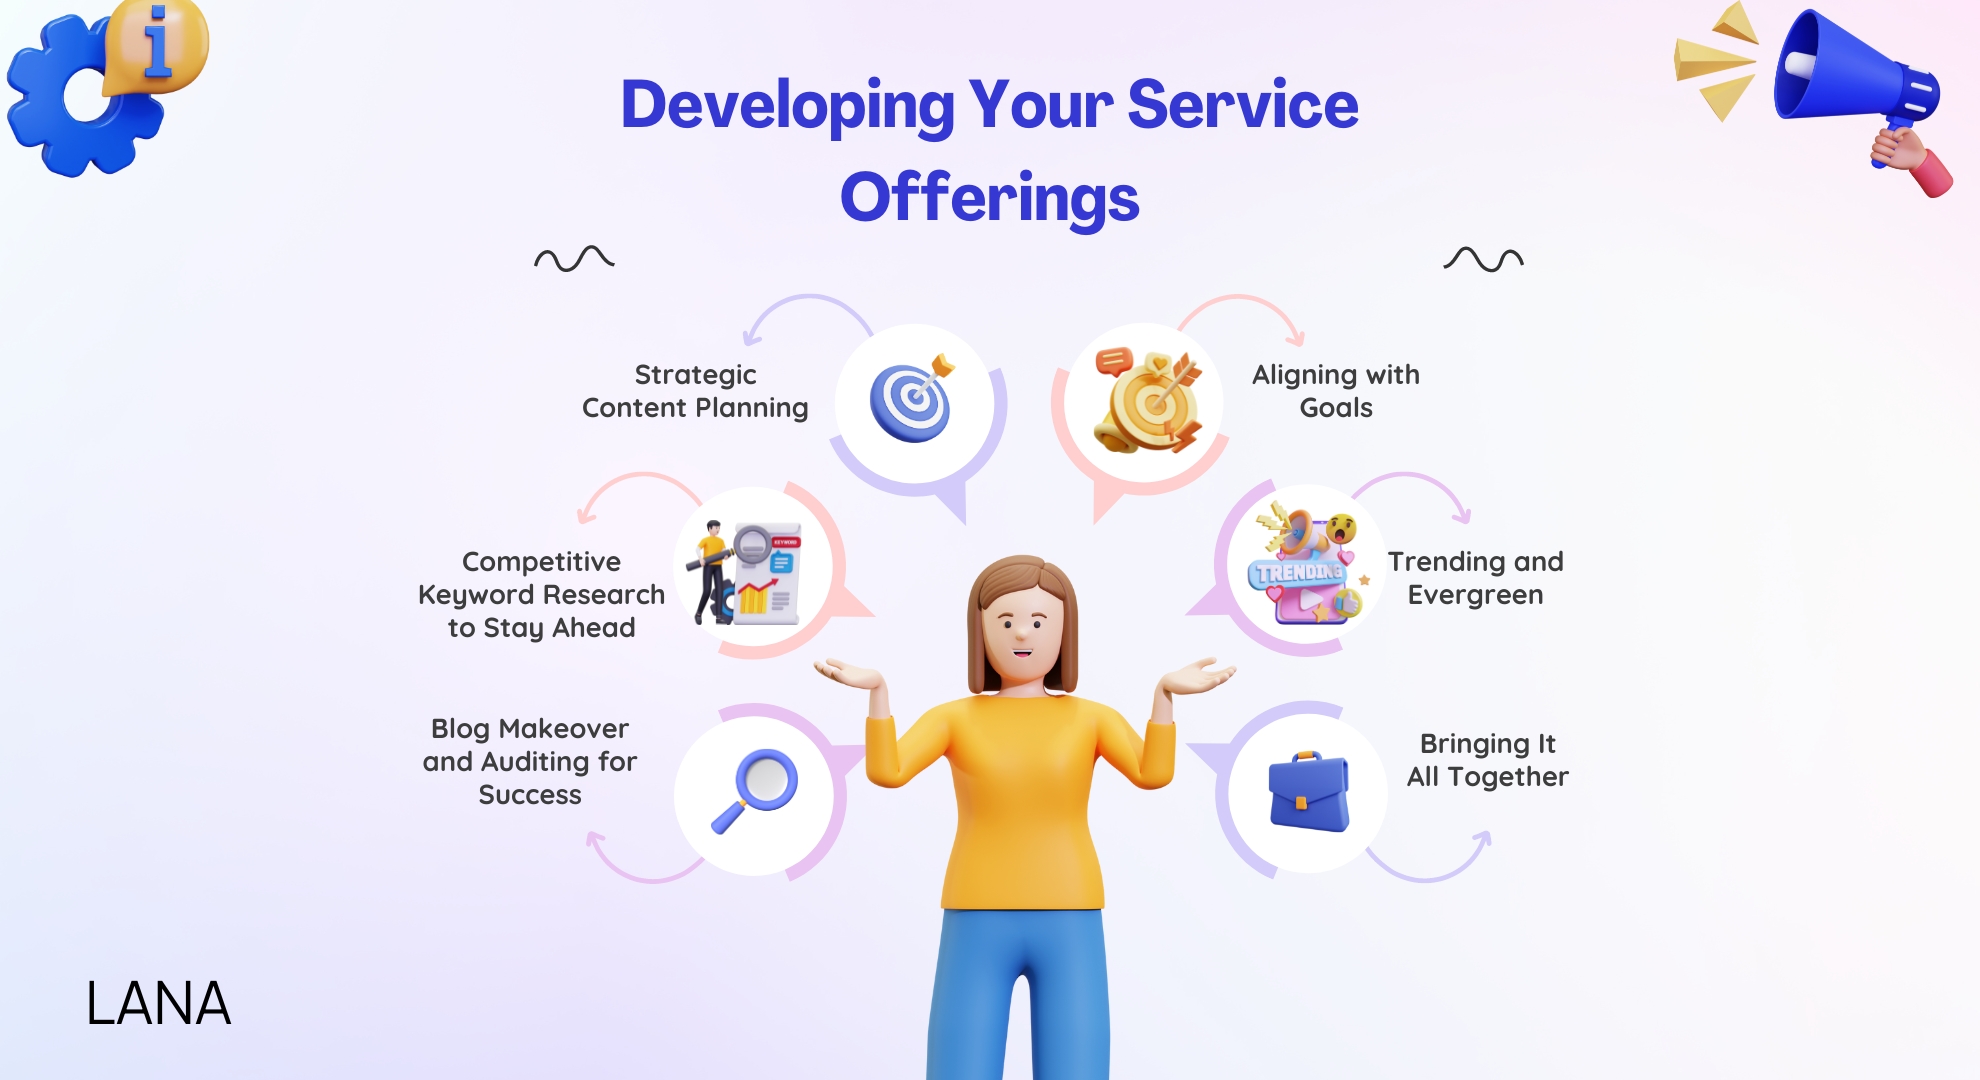 Developing Your Service Offerings